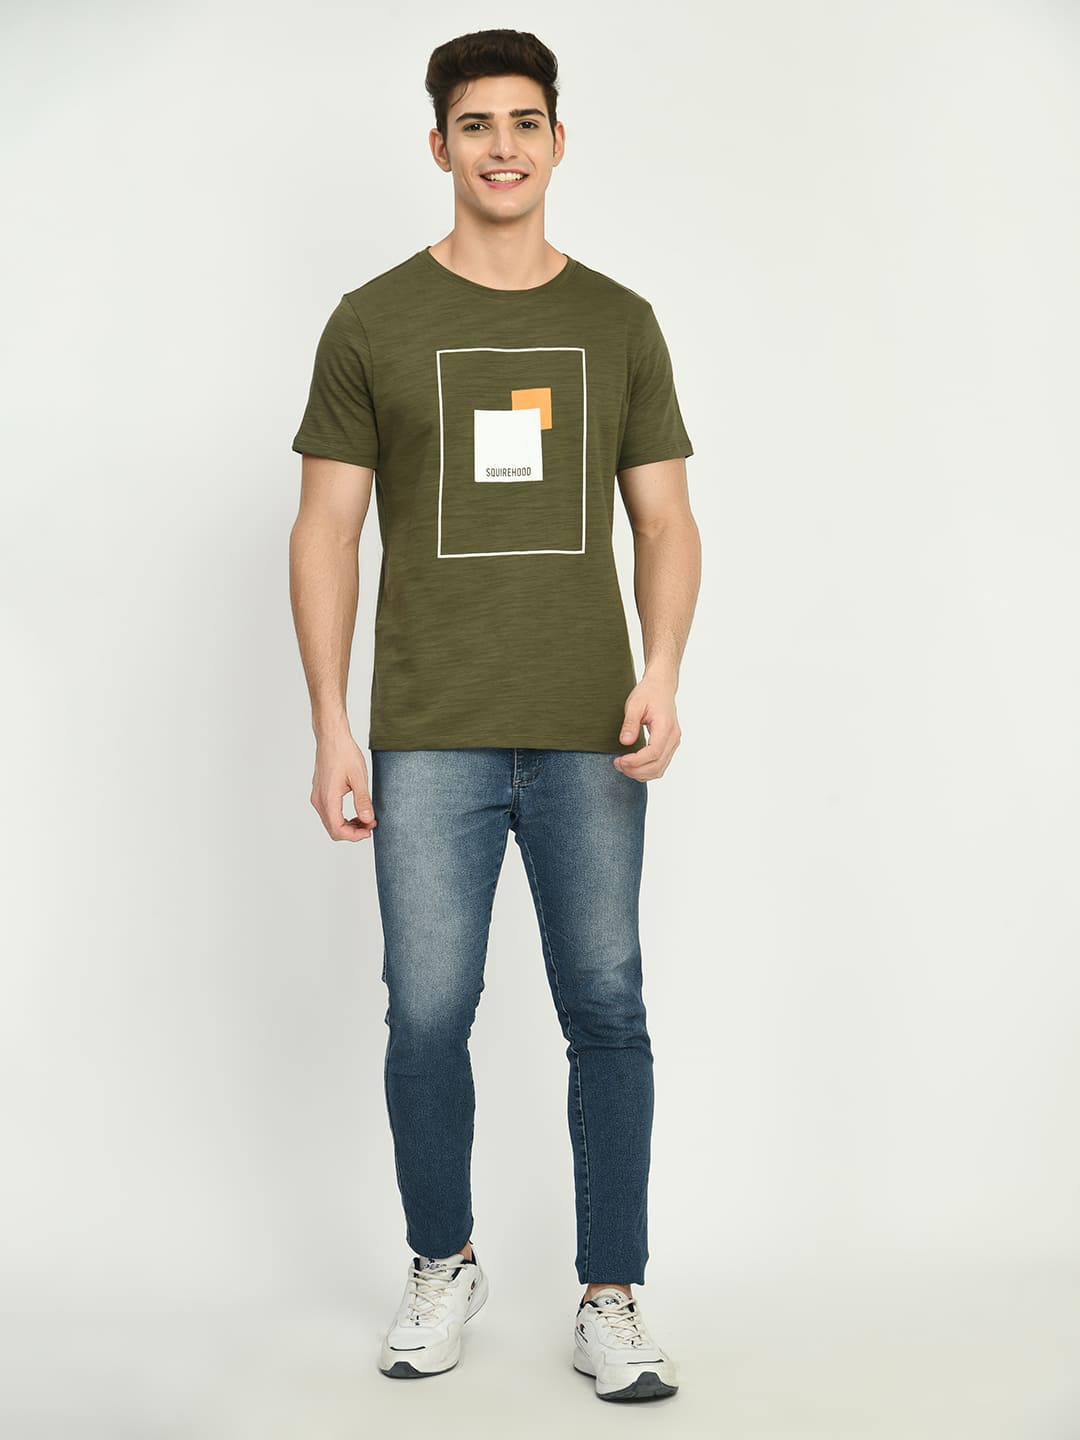 Men's Army Graphic Printed T-Shirt